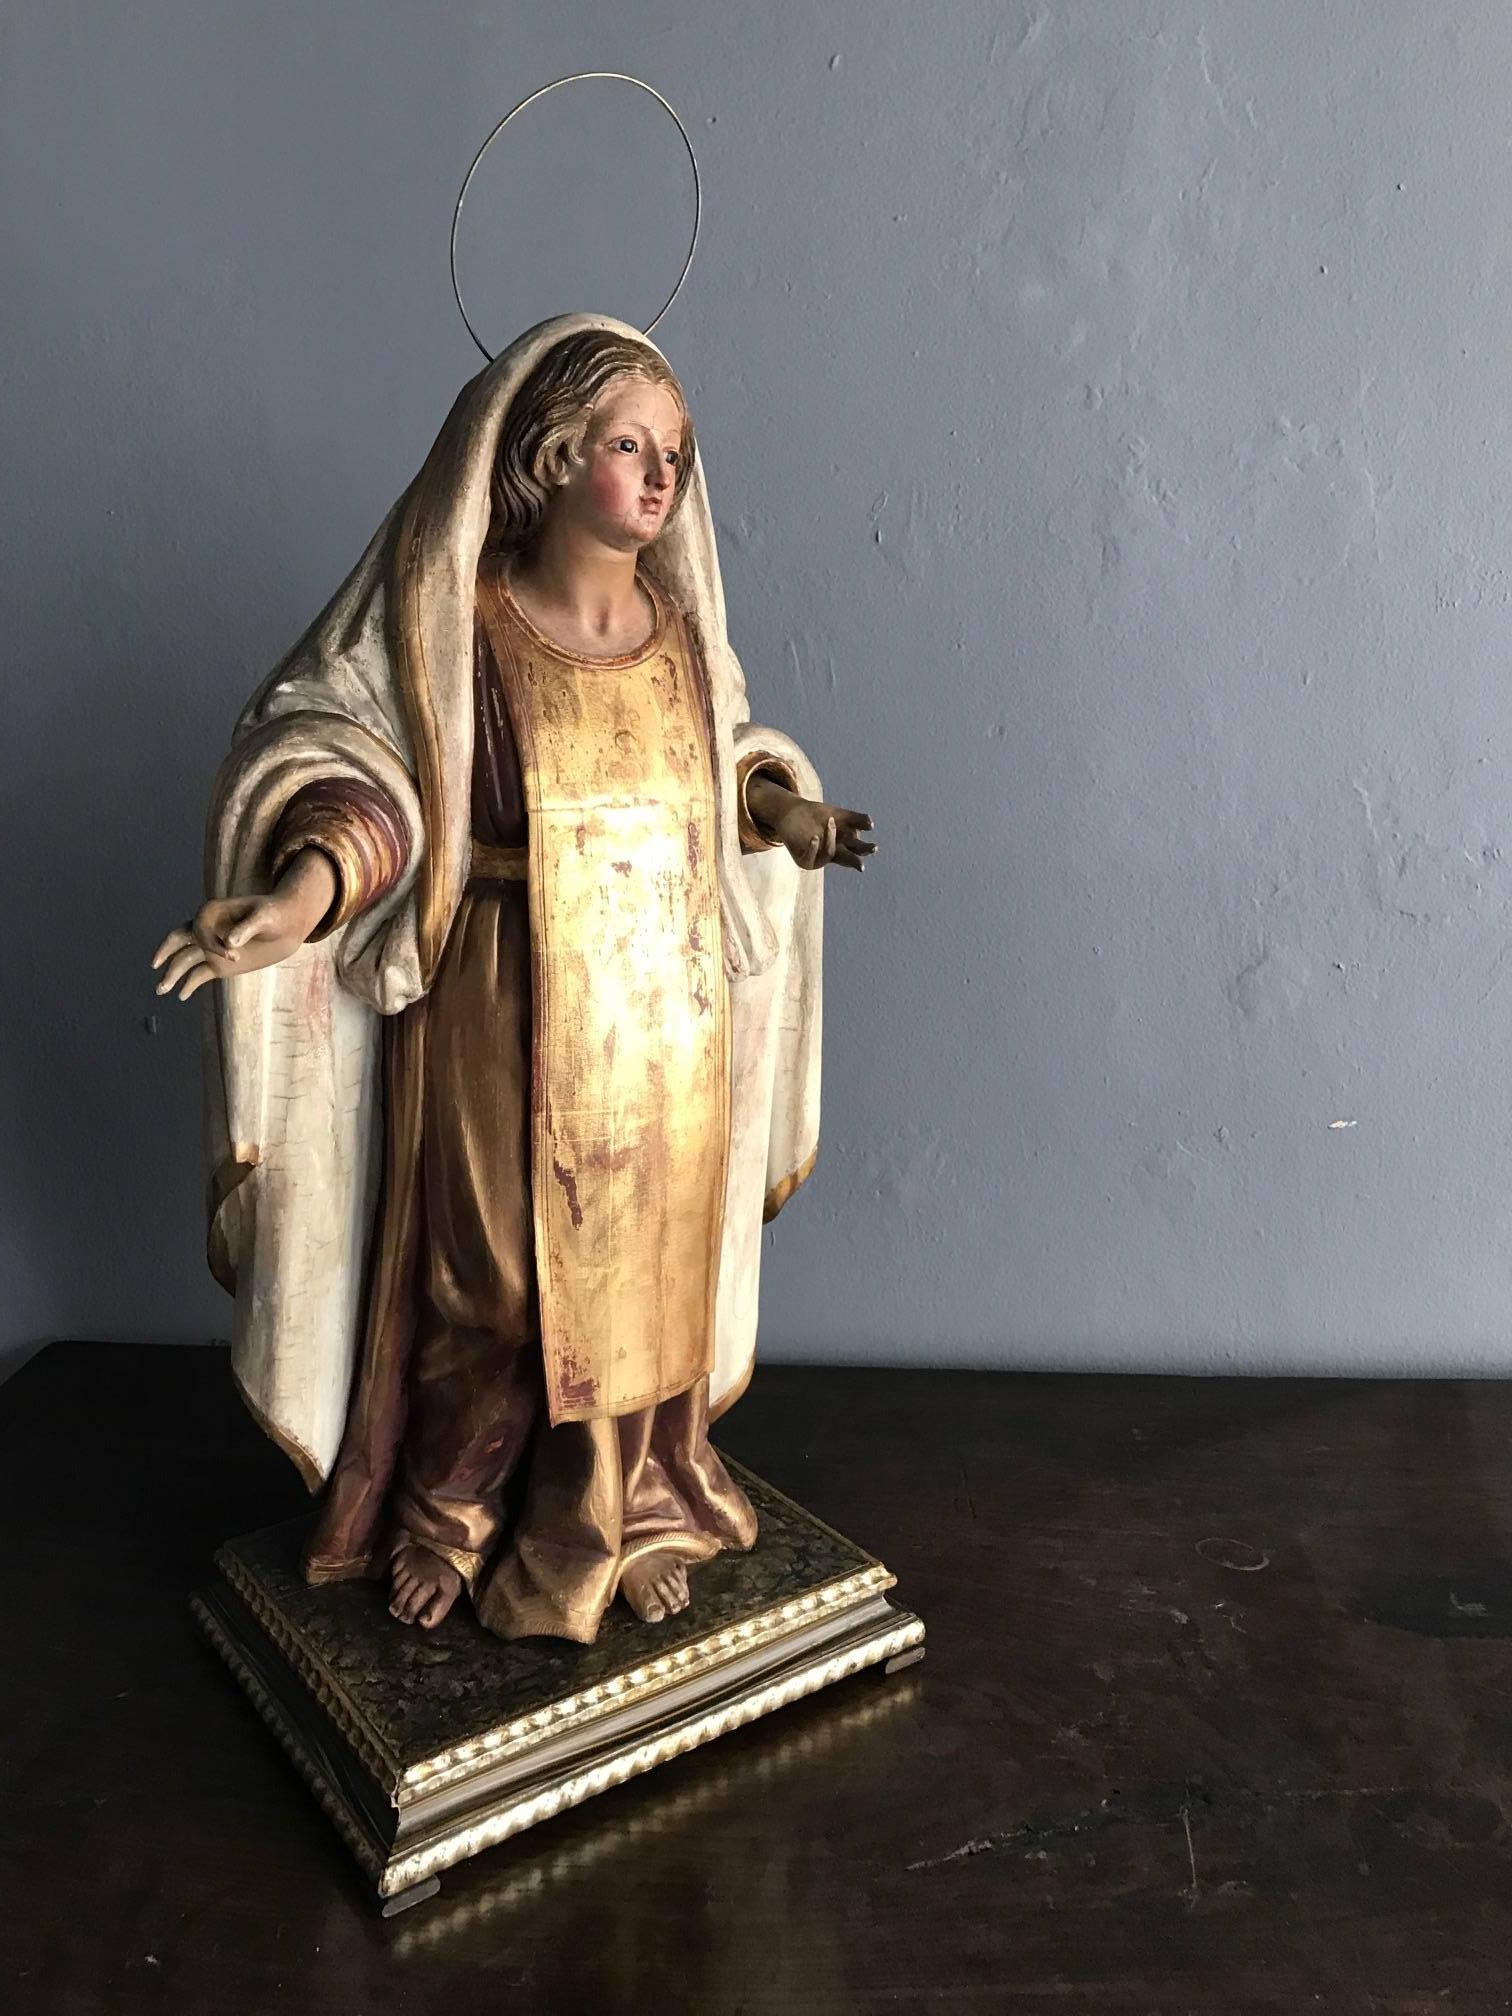 A most spectacular antique Spanish Colonial figure of Madonna, Mexico circa 19th century possibly earlier. Constructed in plaster with carved and gilt wood accent. Realistic in style, and of the highest artistic expression and craftsmanship, this